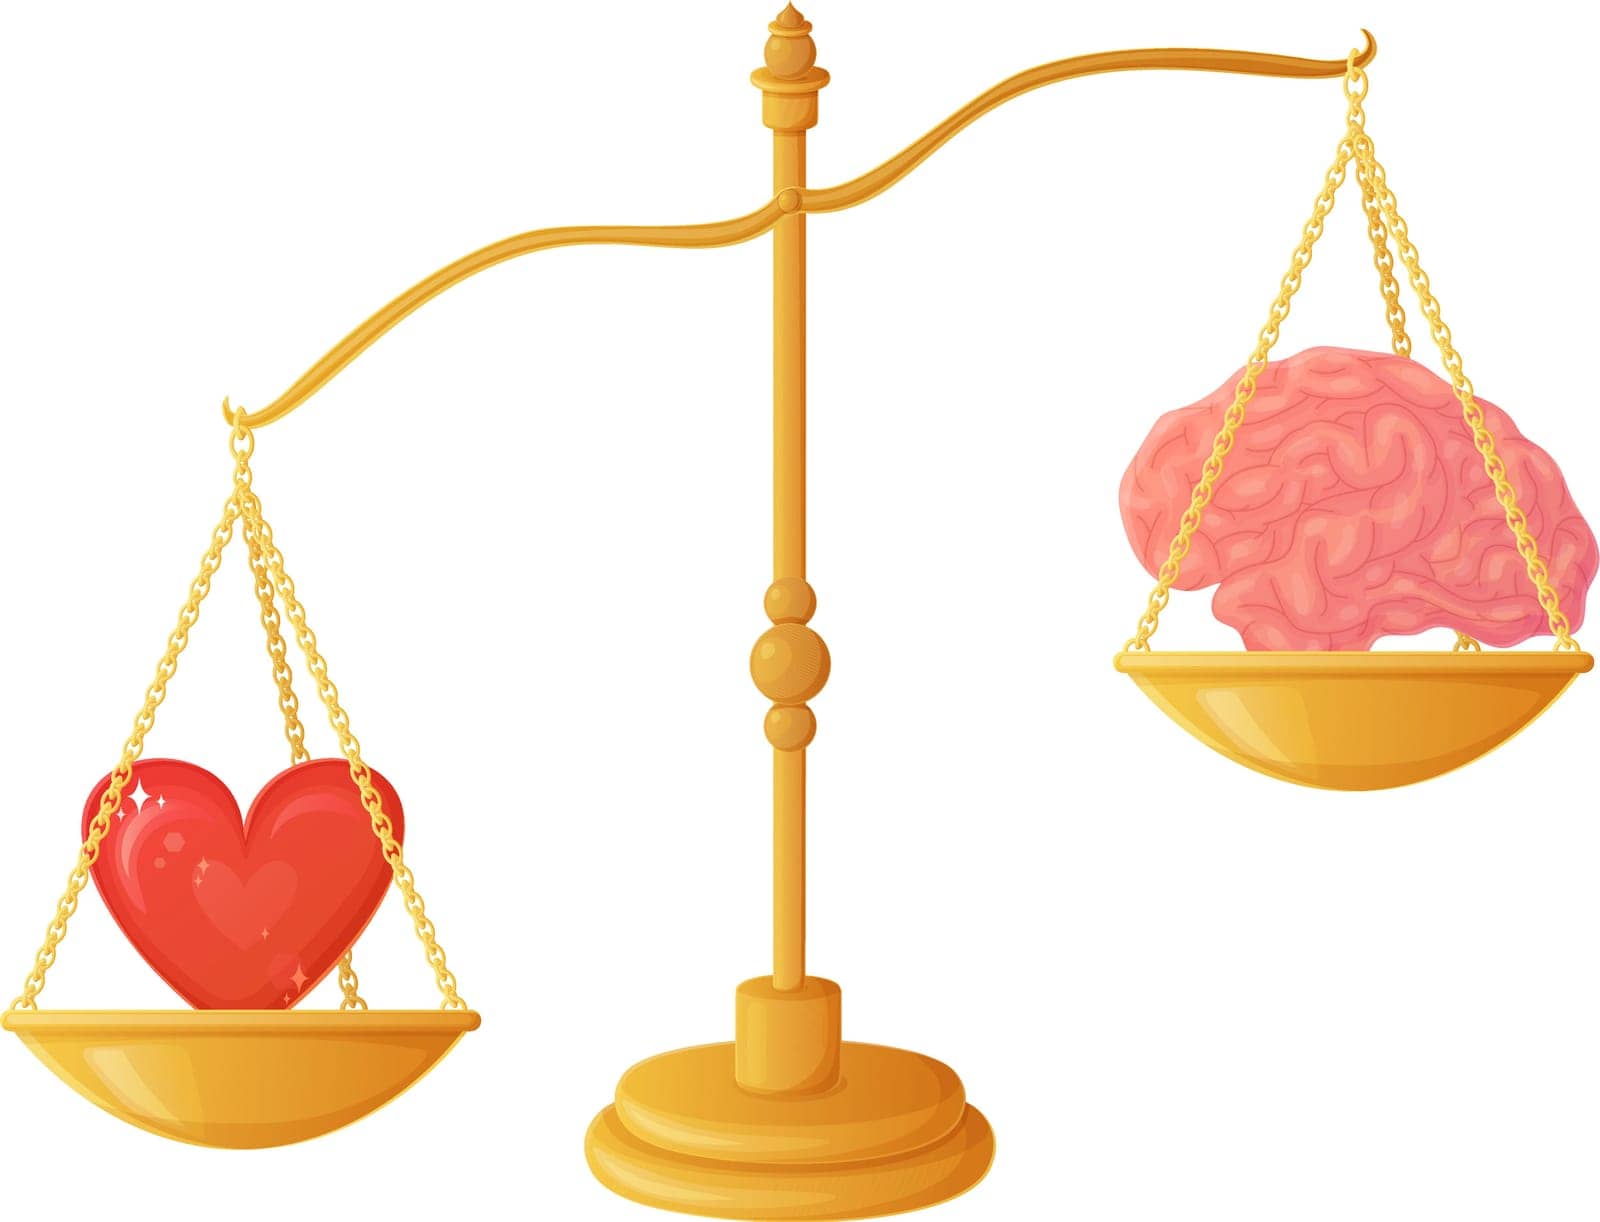 The intellect outweighs the heart on the scales. Brain heart balance illustration concept. Hard to make choice symbol. Love or mind decision stock vector illustration in flat cartoon style.